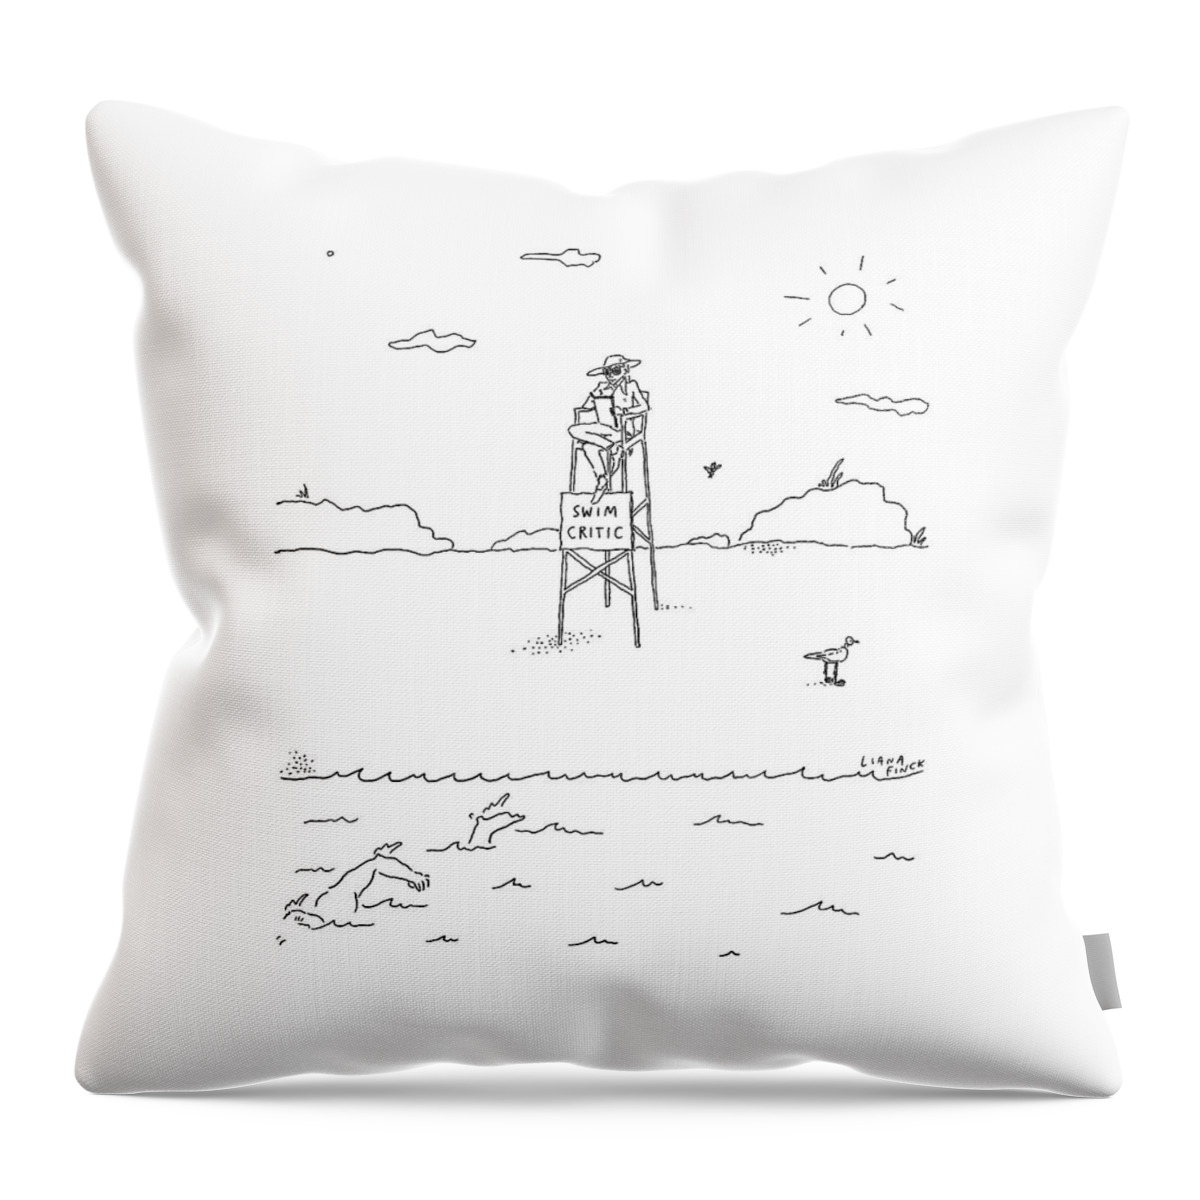 A Man With A Notebook Sits In A Lifeguard Chair Throw Pillow